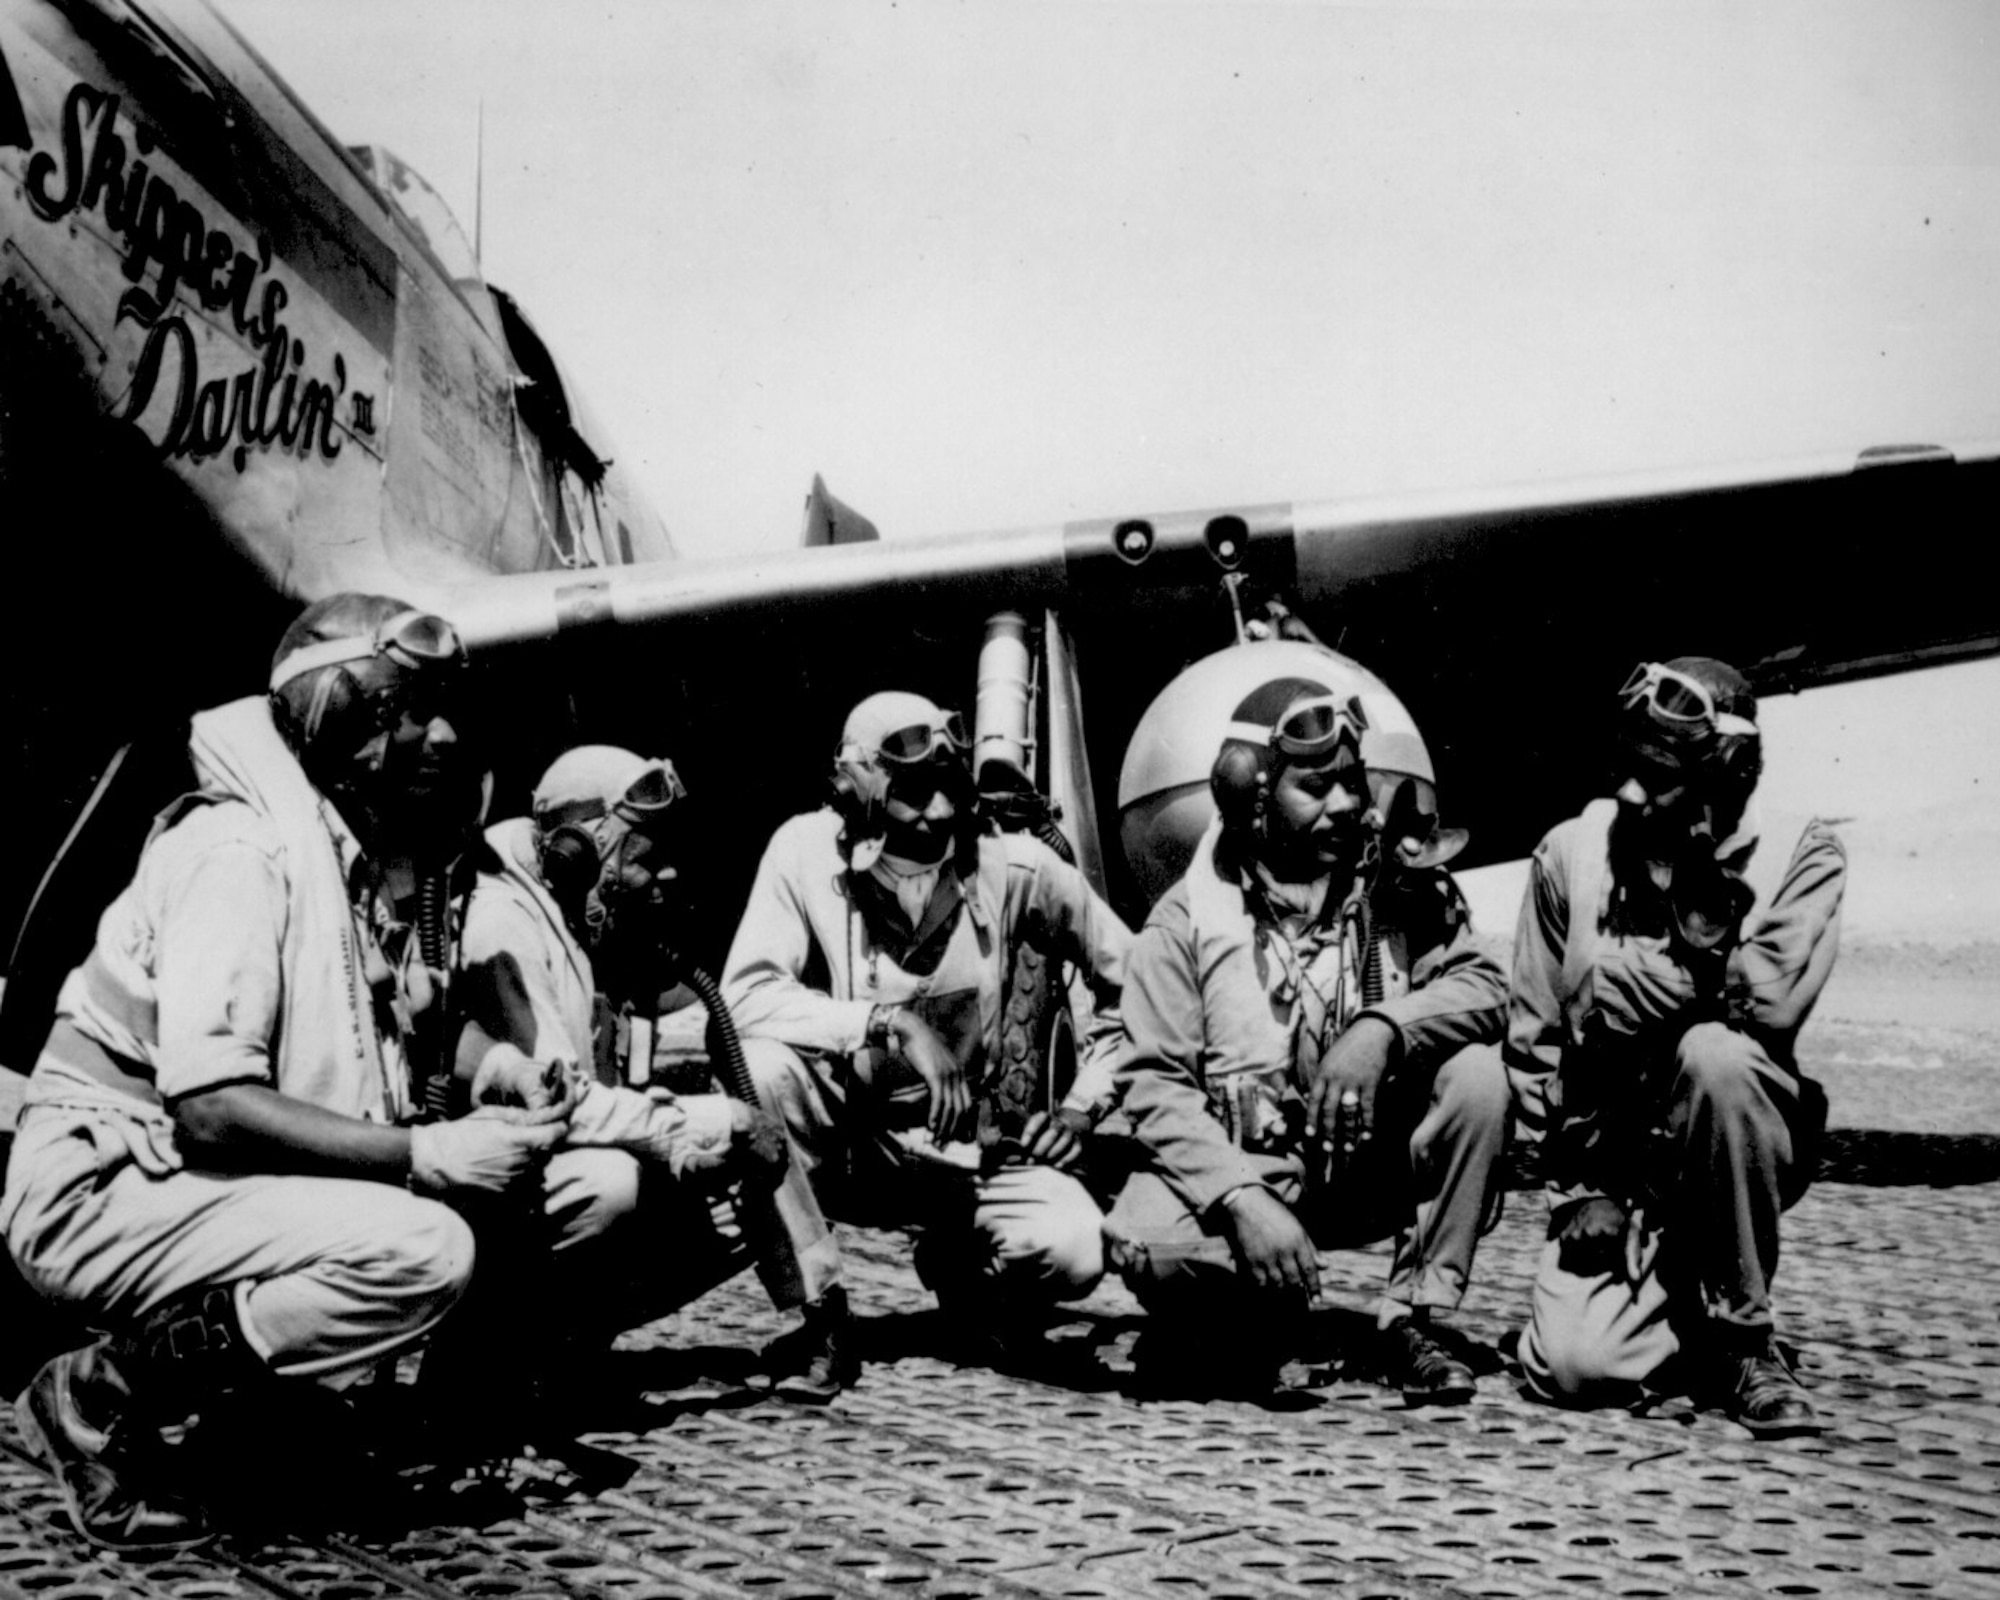 Fliers of a P-51 Mustang Group of the 15th Air Force in Italy talk in the shadow of one off the Mustangs they fly, August 1944. Left to right, Lt. Dempsey W. Morgan Jr., Lt. Carroll S. Woods, Lt. Robert H. Nelson Jr., Capt. Andrew D. Turner, and Lt. Clarence P. Lester.